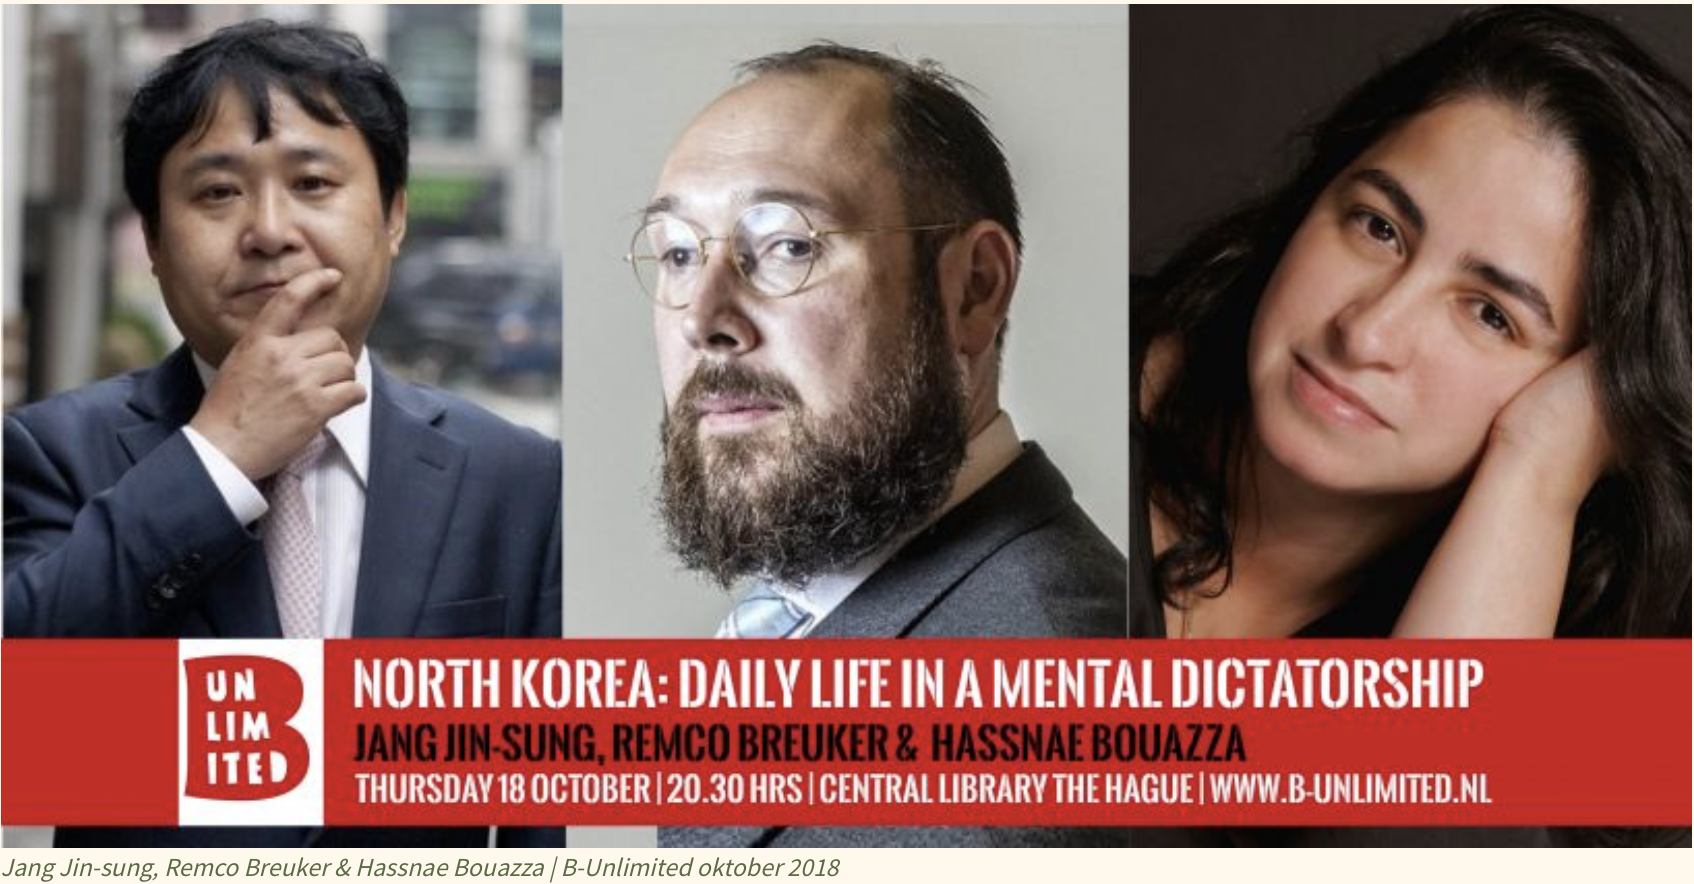 North Korea: daily life in a mental dictatorship – the story of the refugee